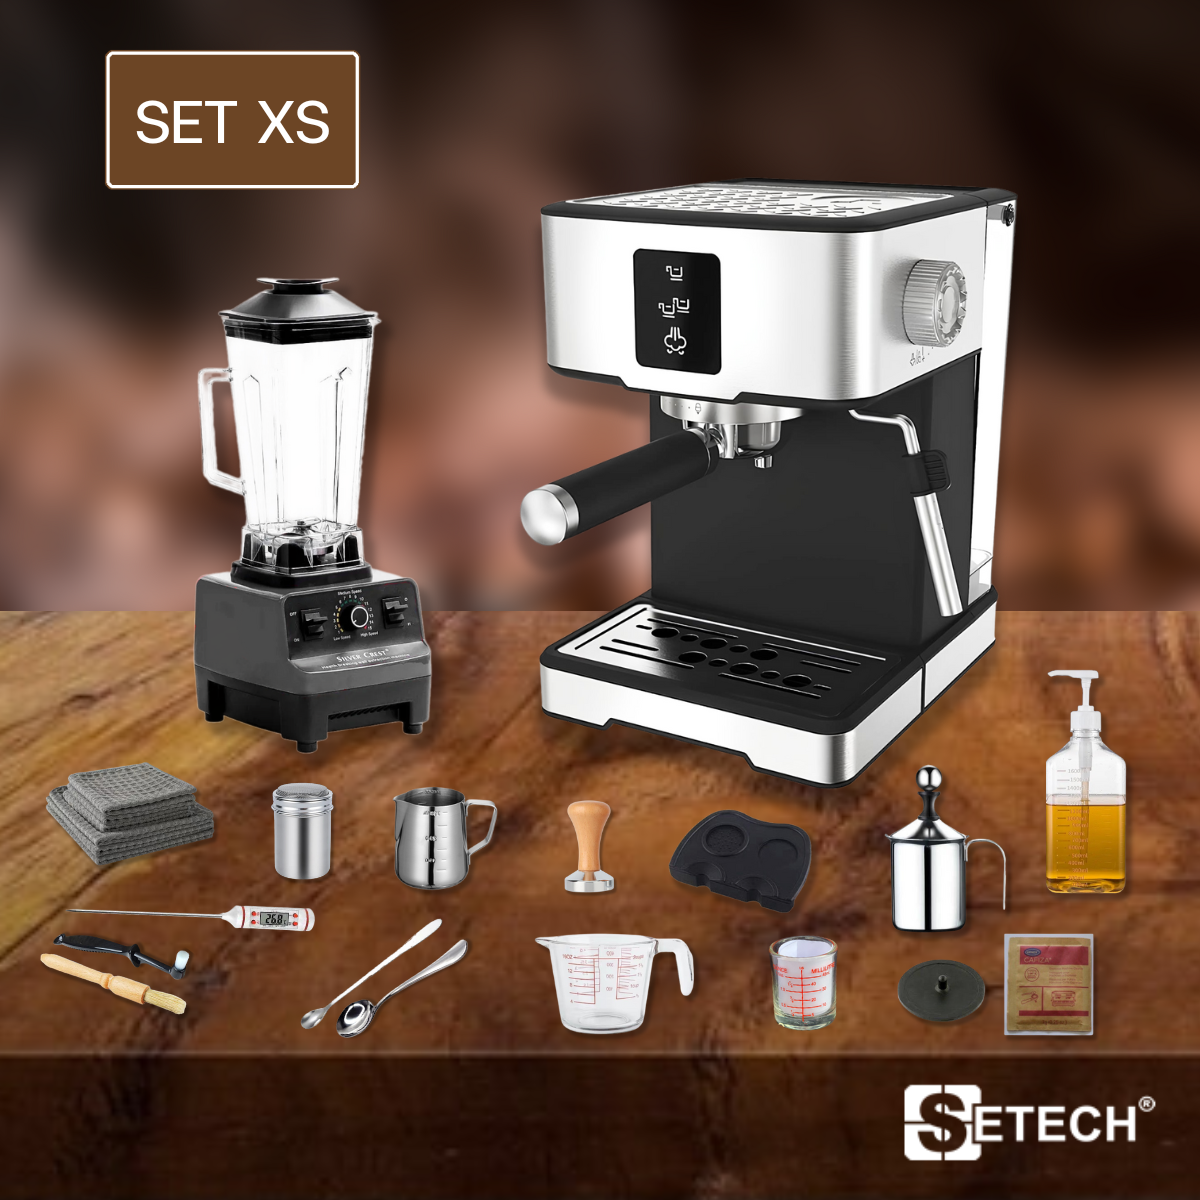 Coffee maker set for opening a shop equipment 23 items SET XS SET XS